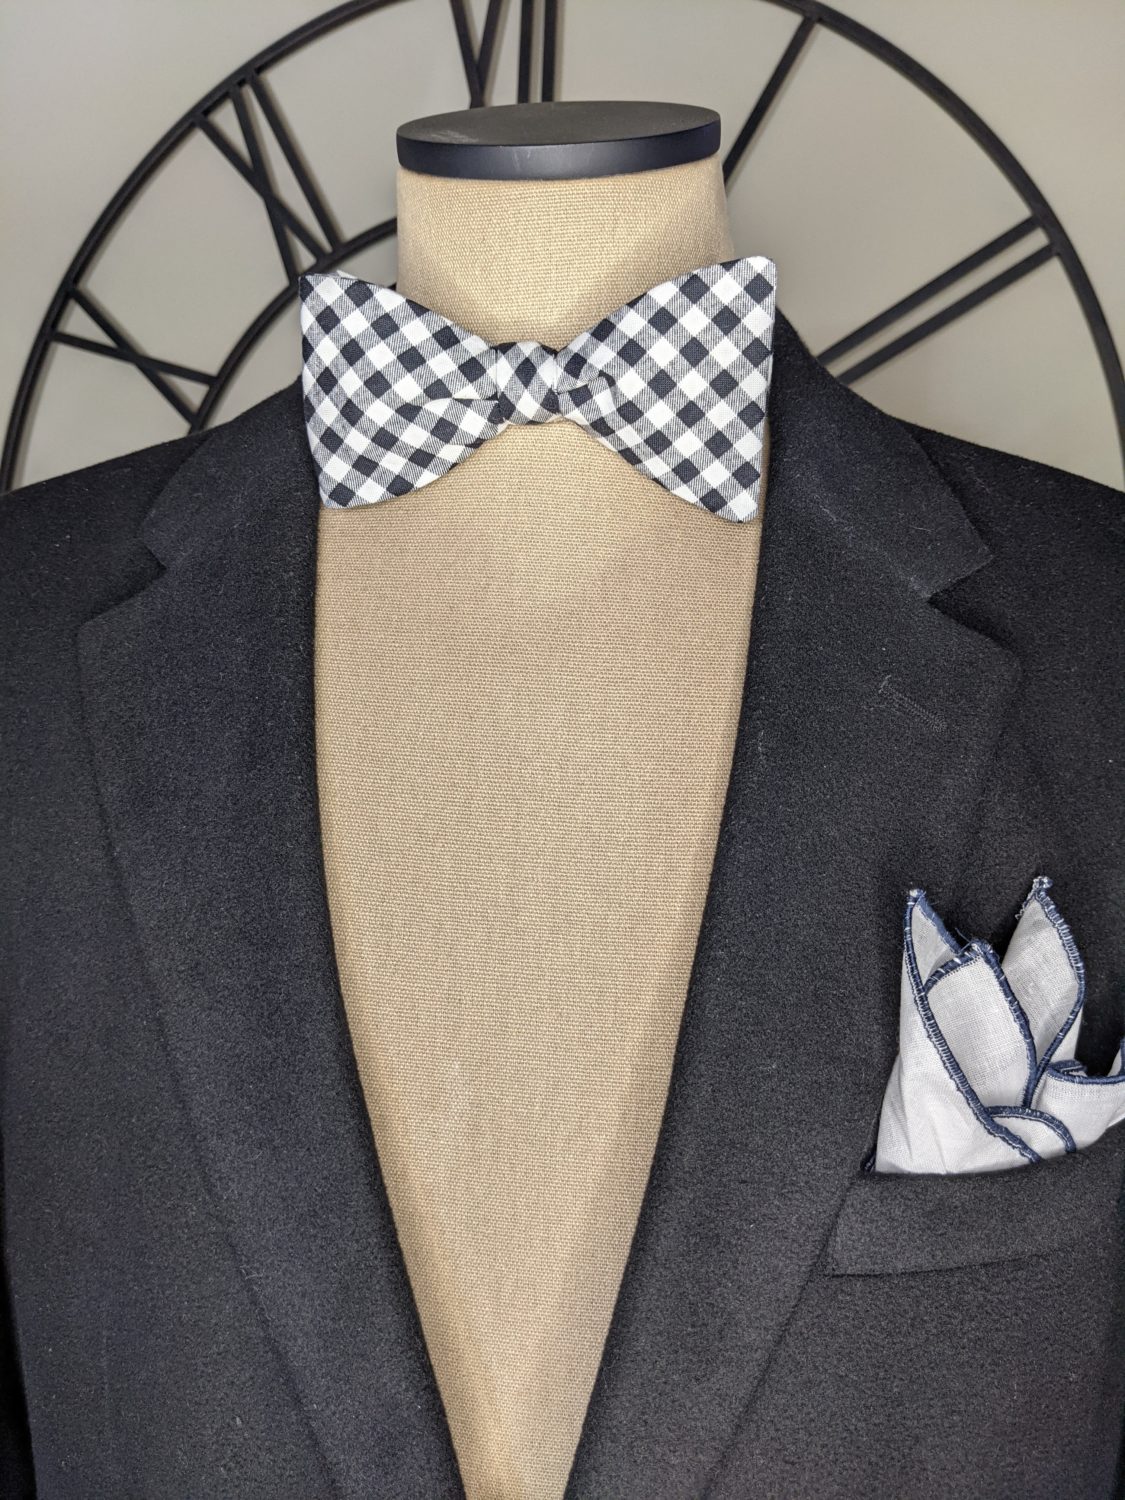 Black/White Gingham Bow Tie - About Bow Ties - Formal Bow Tie